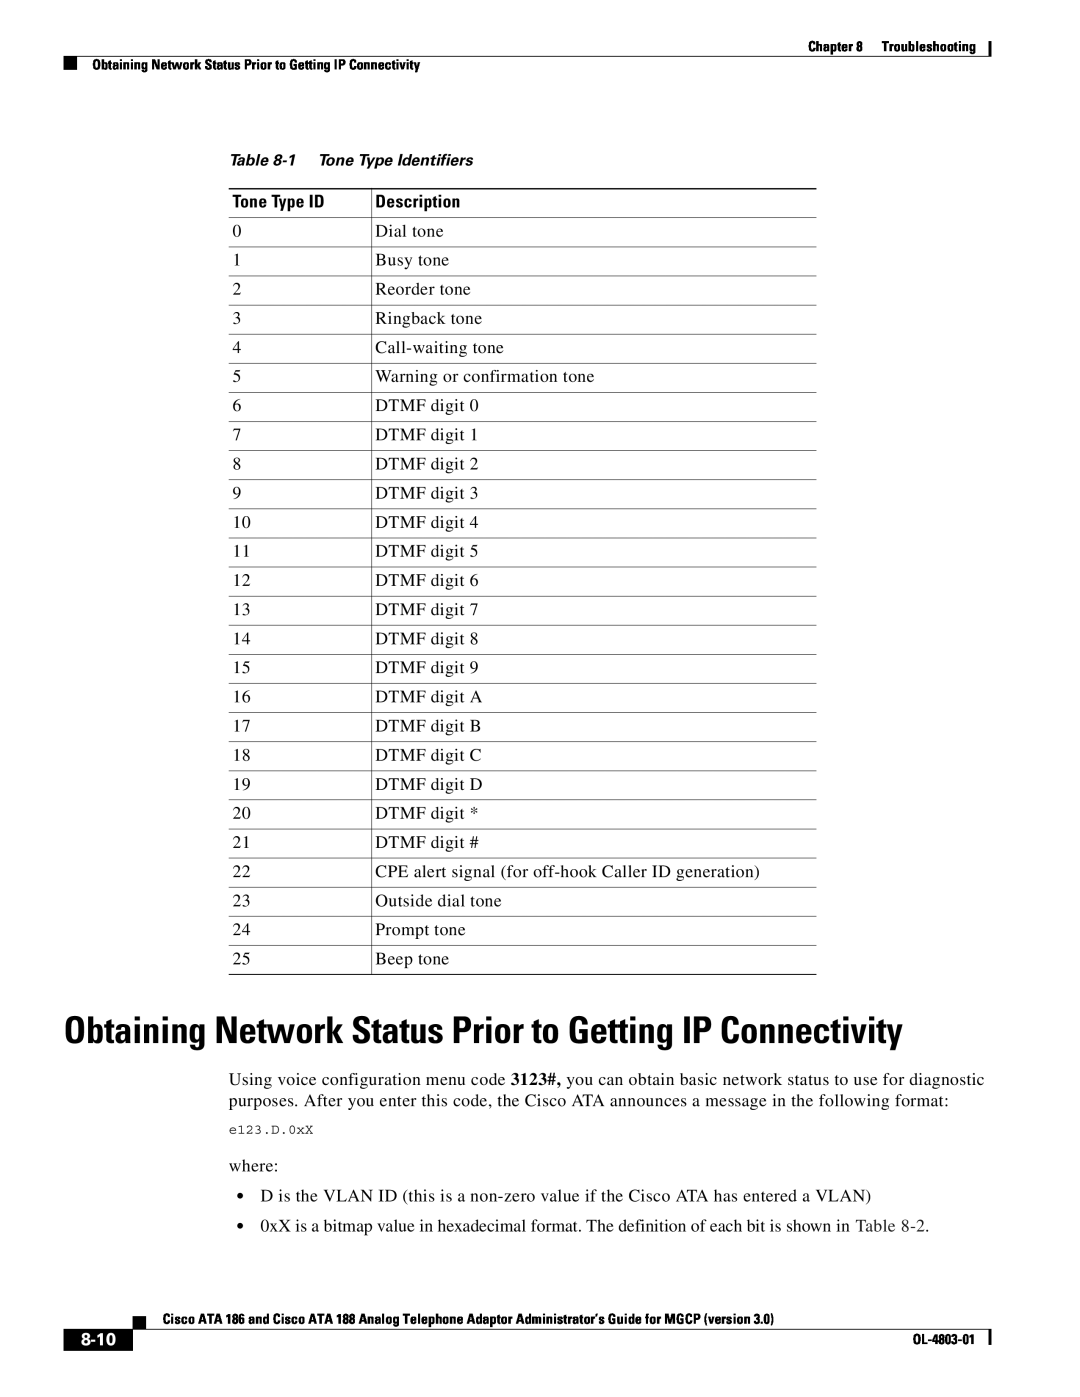 Cisco Systems ATA 186 manual Obtaining Network Status Prior to Getting IP Connectivity, Tone Type ID, 8-10, Description 